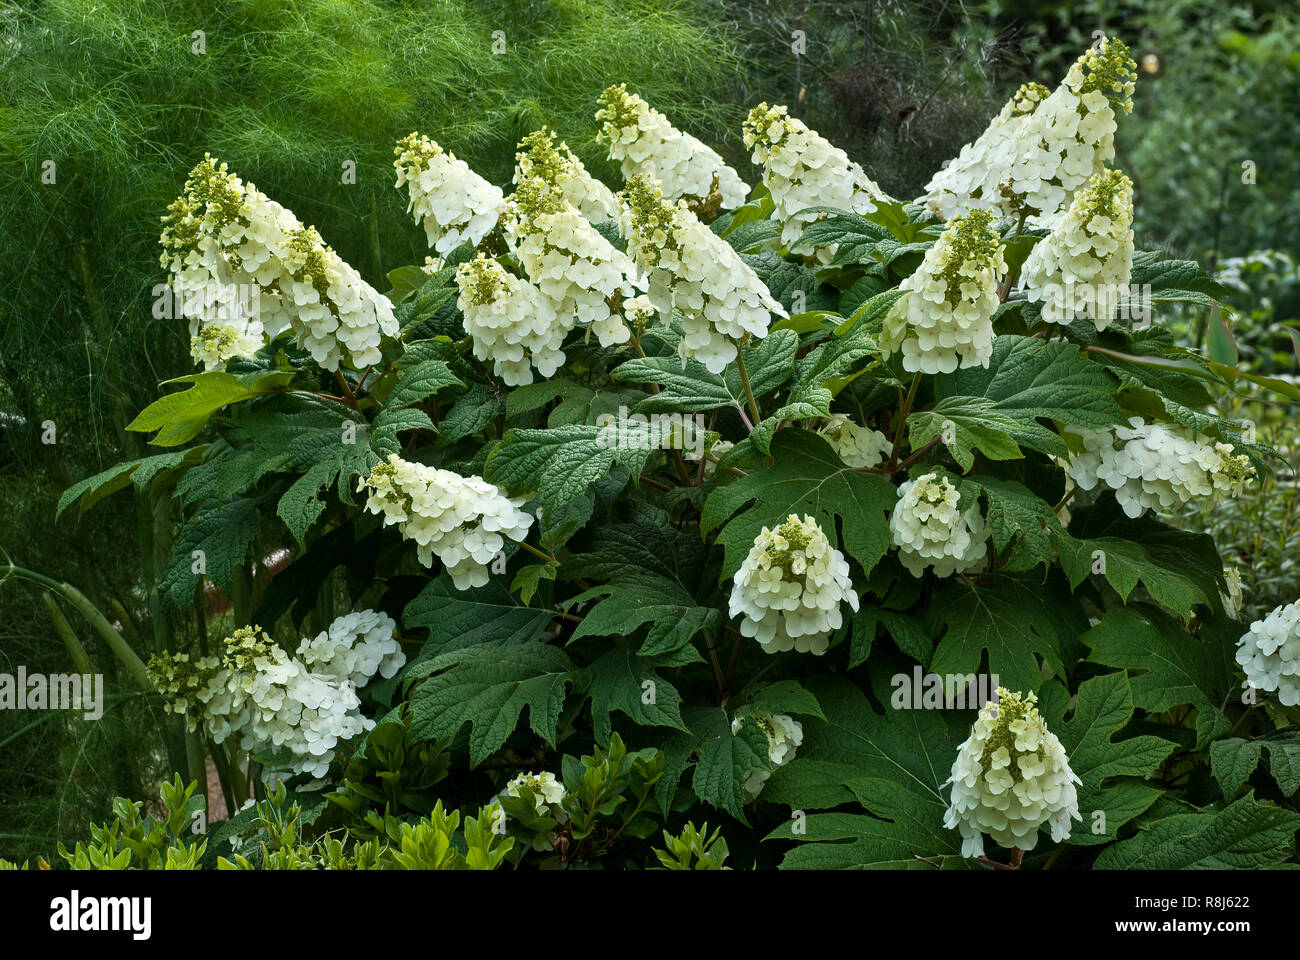 Page 2 - Oakleaf Hydrangea High Resolution Stock Photography and Images -  Alamy